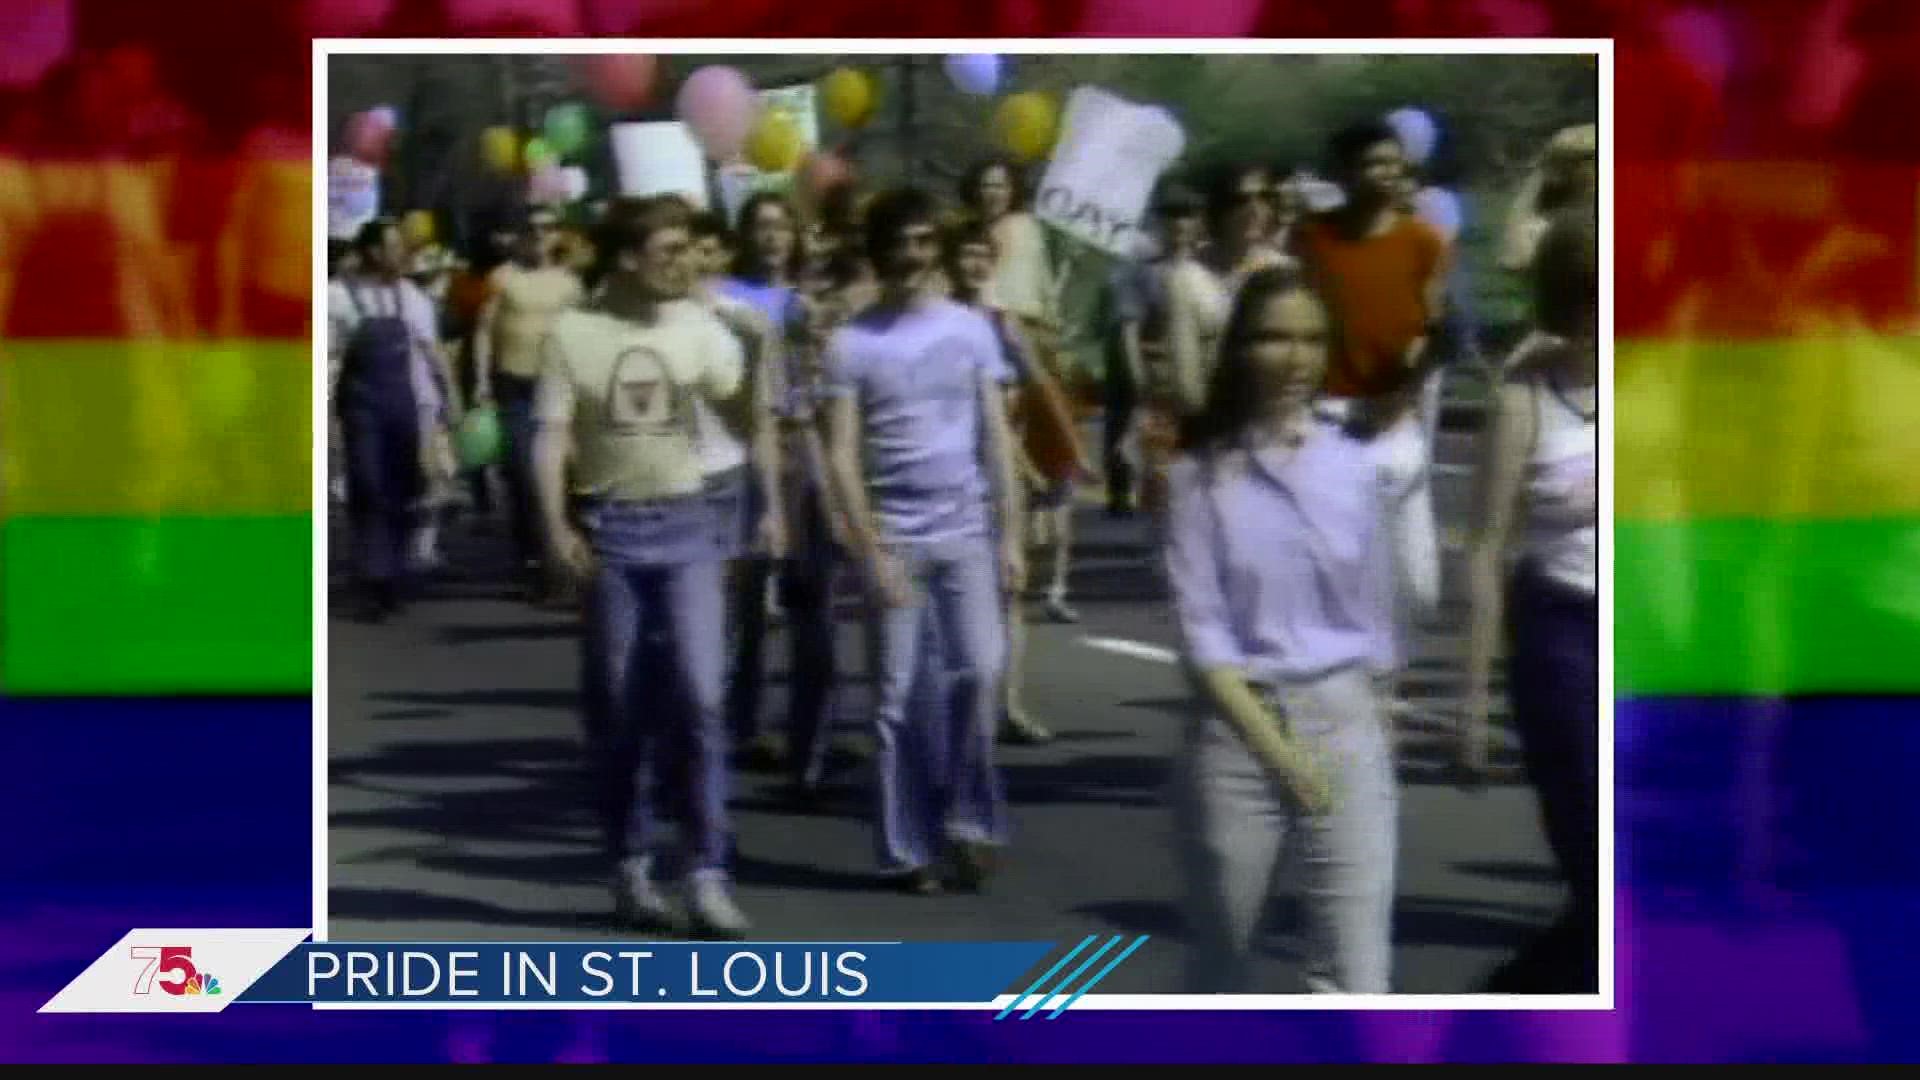 We’re reflecting on some of the biggest stories over the decades. In those years, St. Louis’ LGBTQ community has fought through injustice and celebrated triumphs.